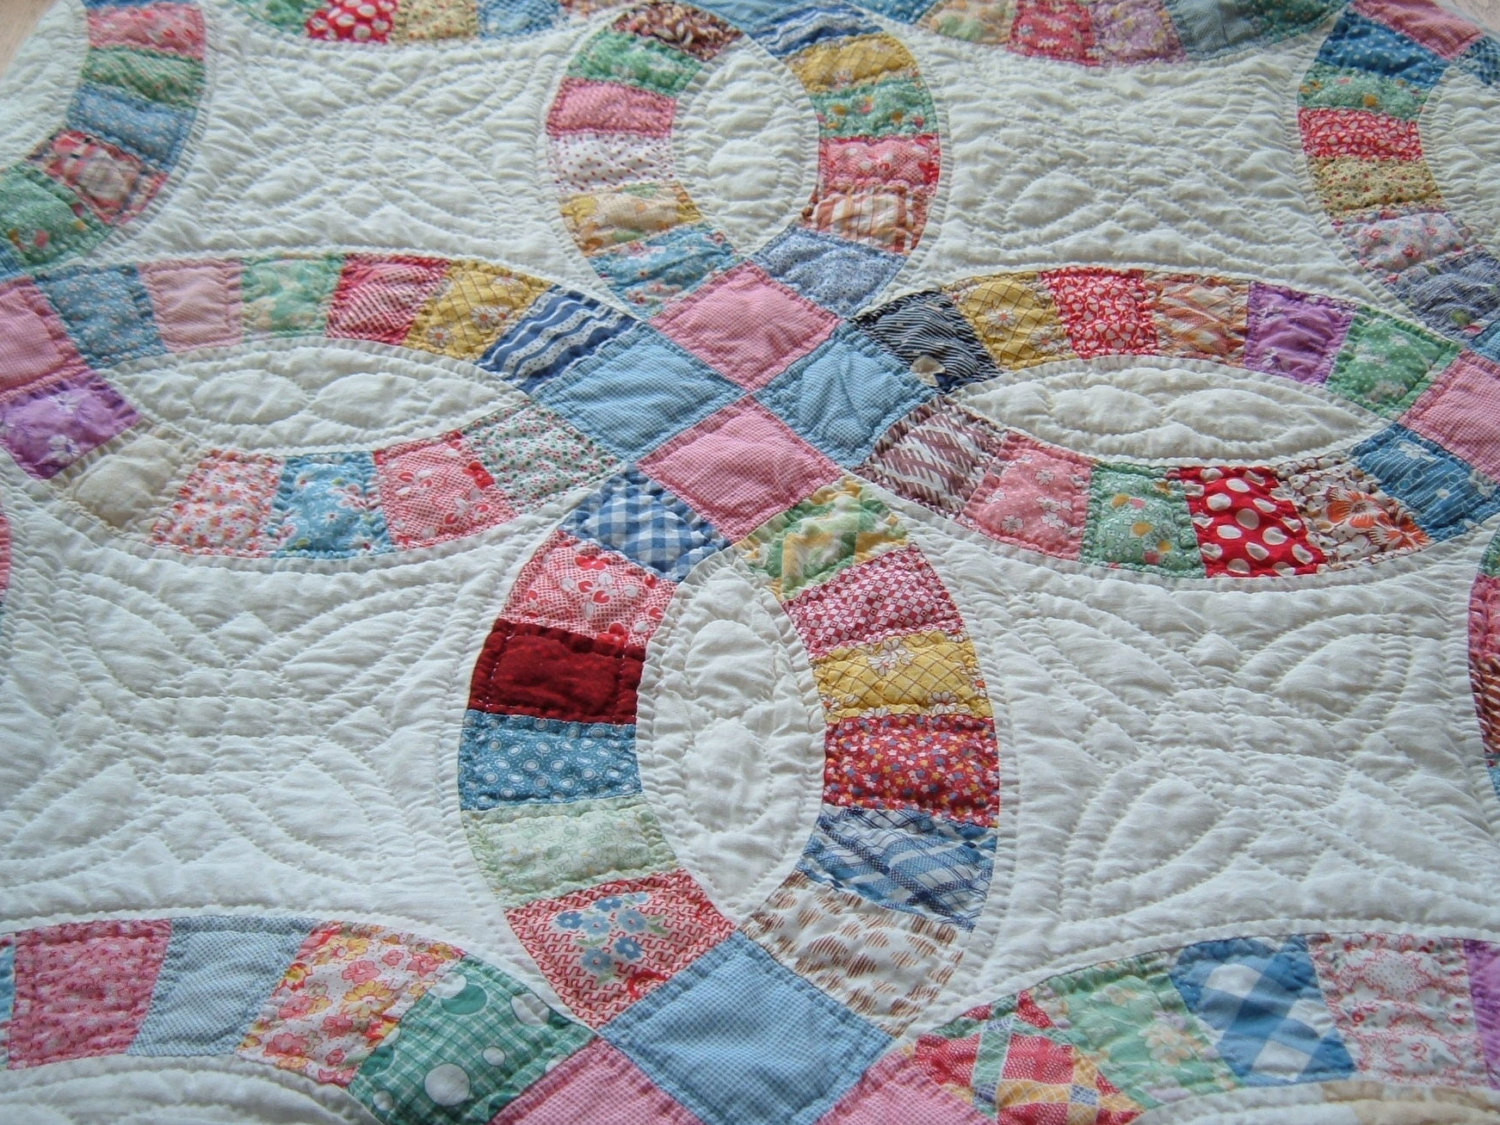 Wedding Ring Quilt
 Vintage Handmade Double Wedding Ring Quilt